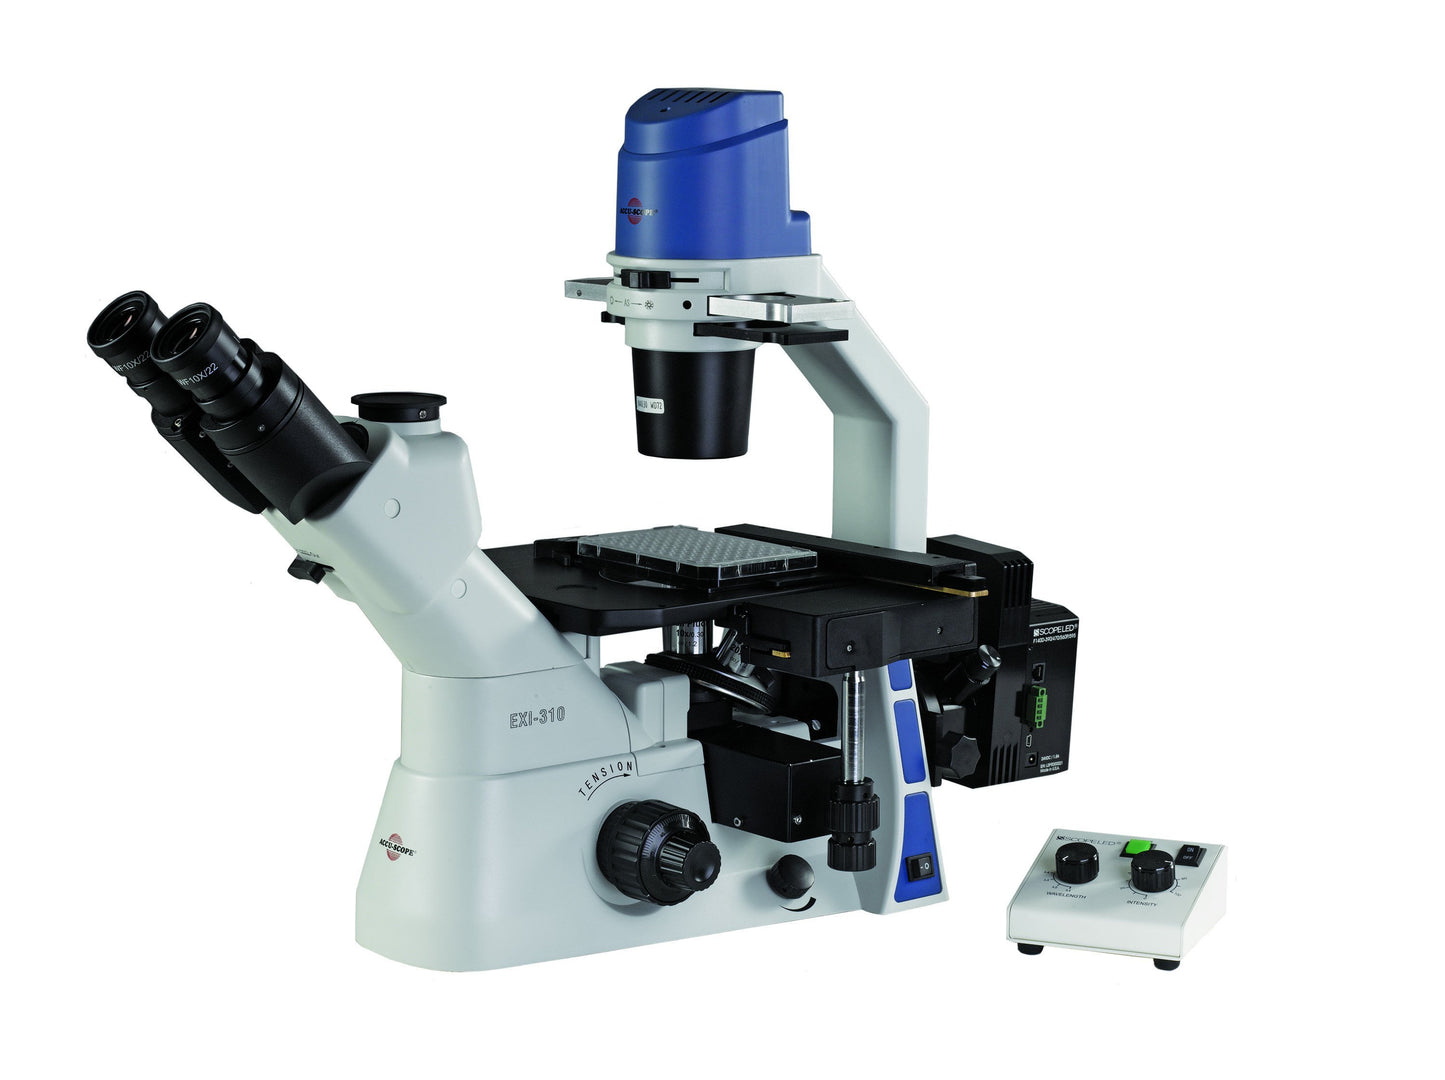 Accu-Scope EXI-310 Inverted Phase Contrast LED Fluorescence Microscope